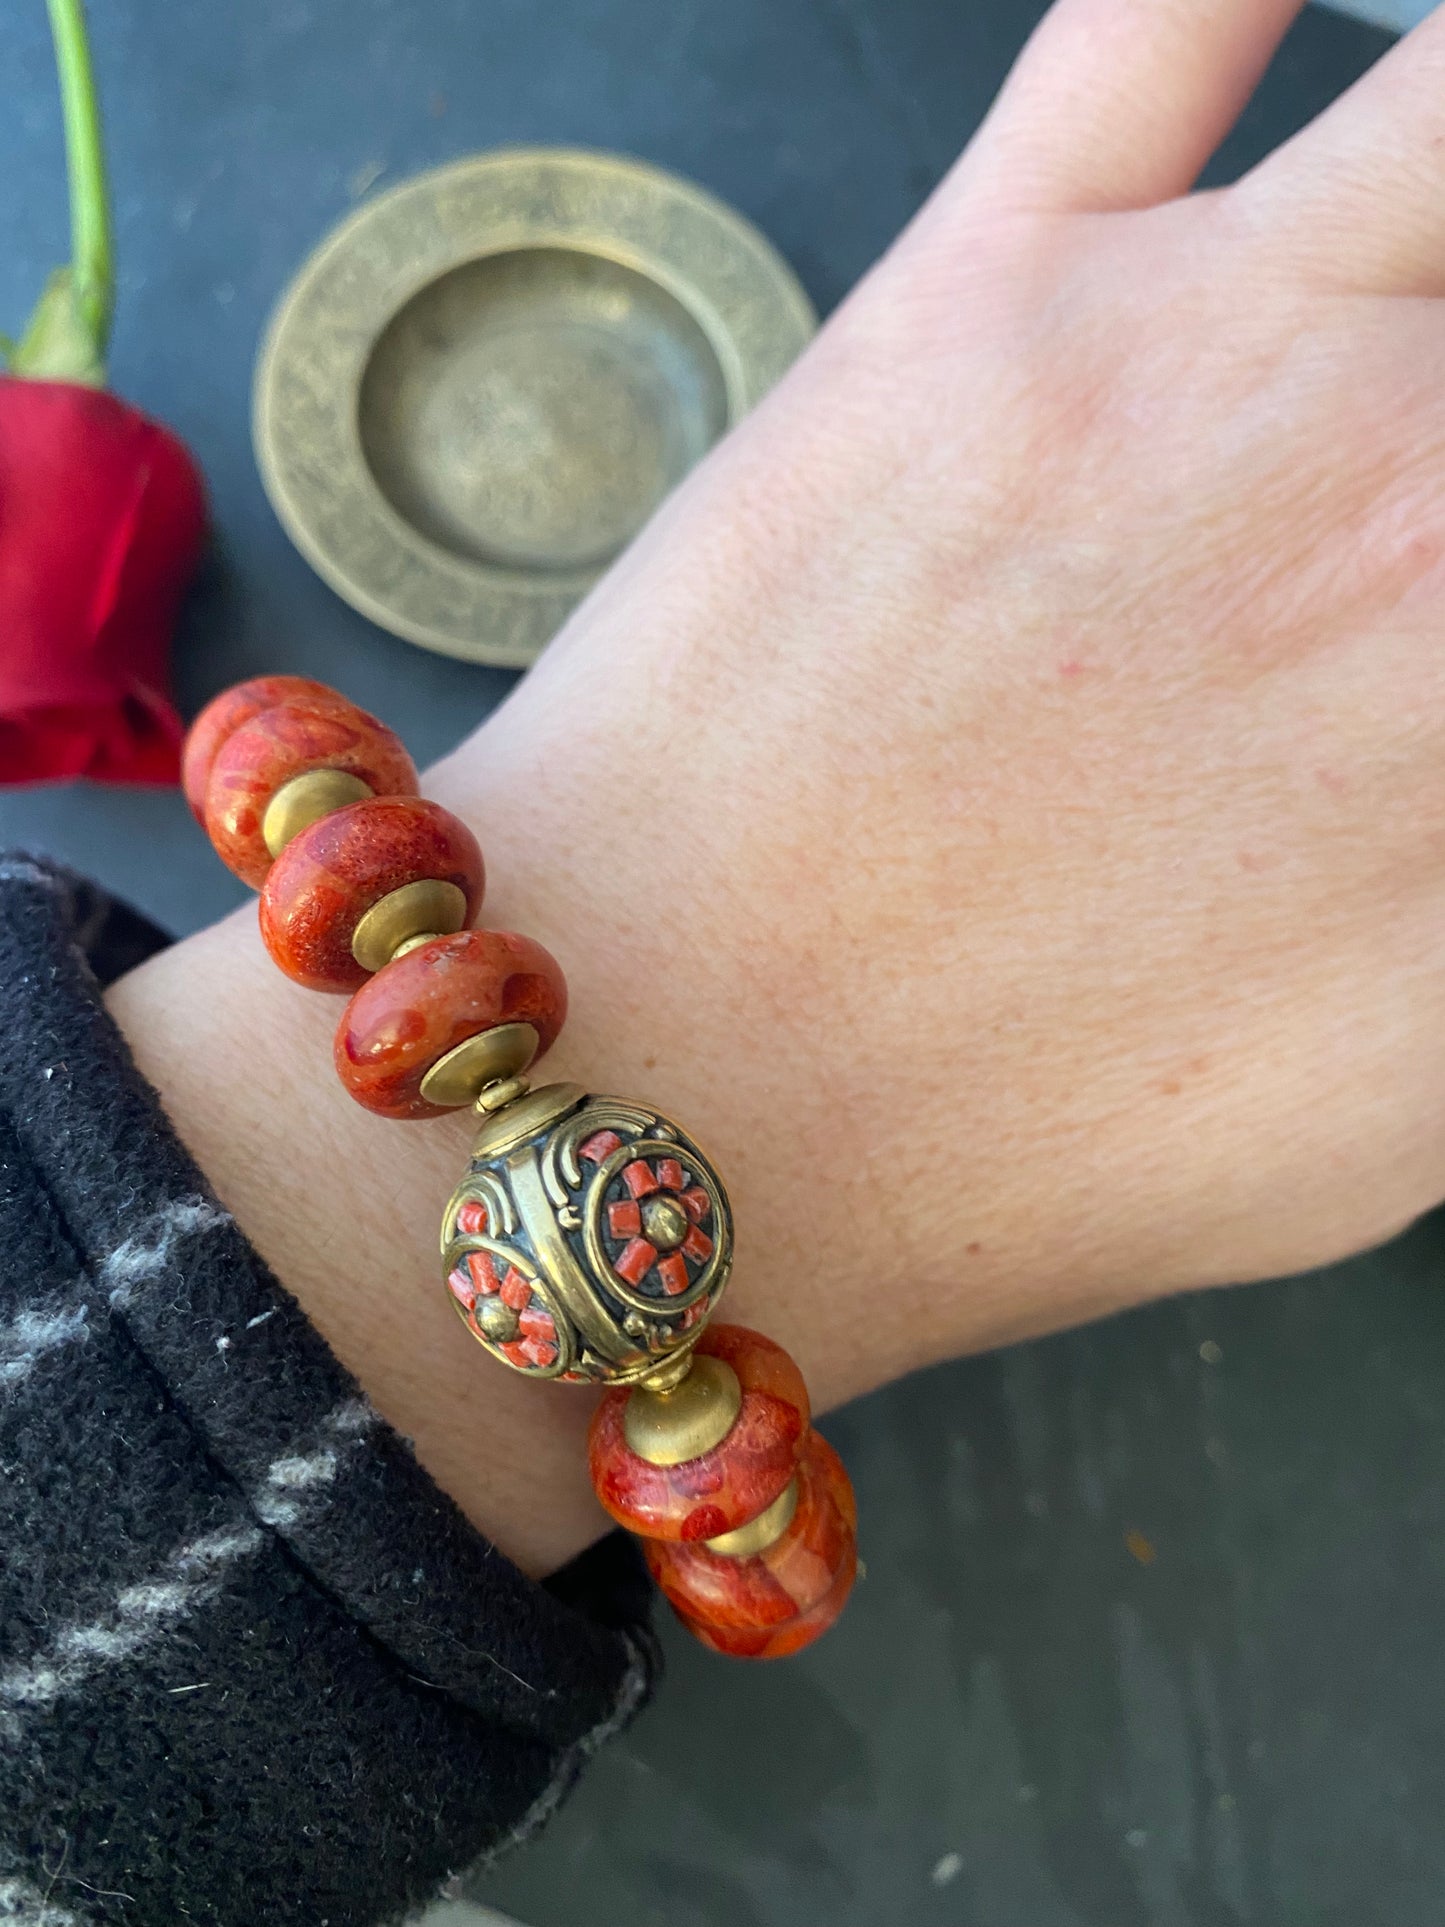 Red sponge coral, nepal flower coral bead, Indonesian glass, African brass, bracelet